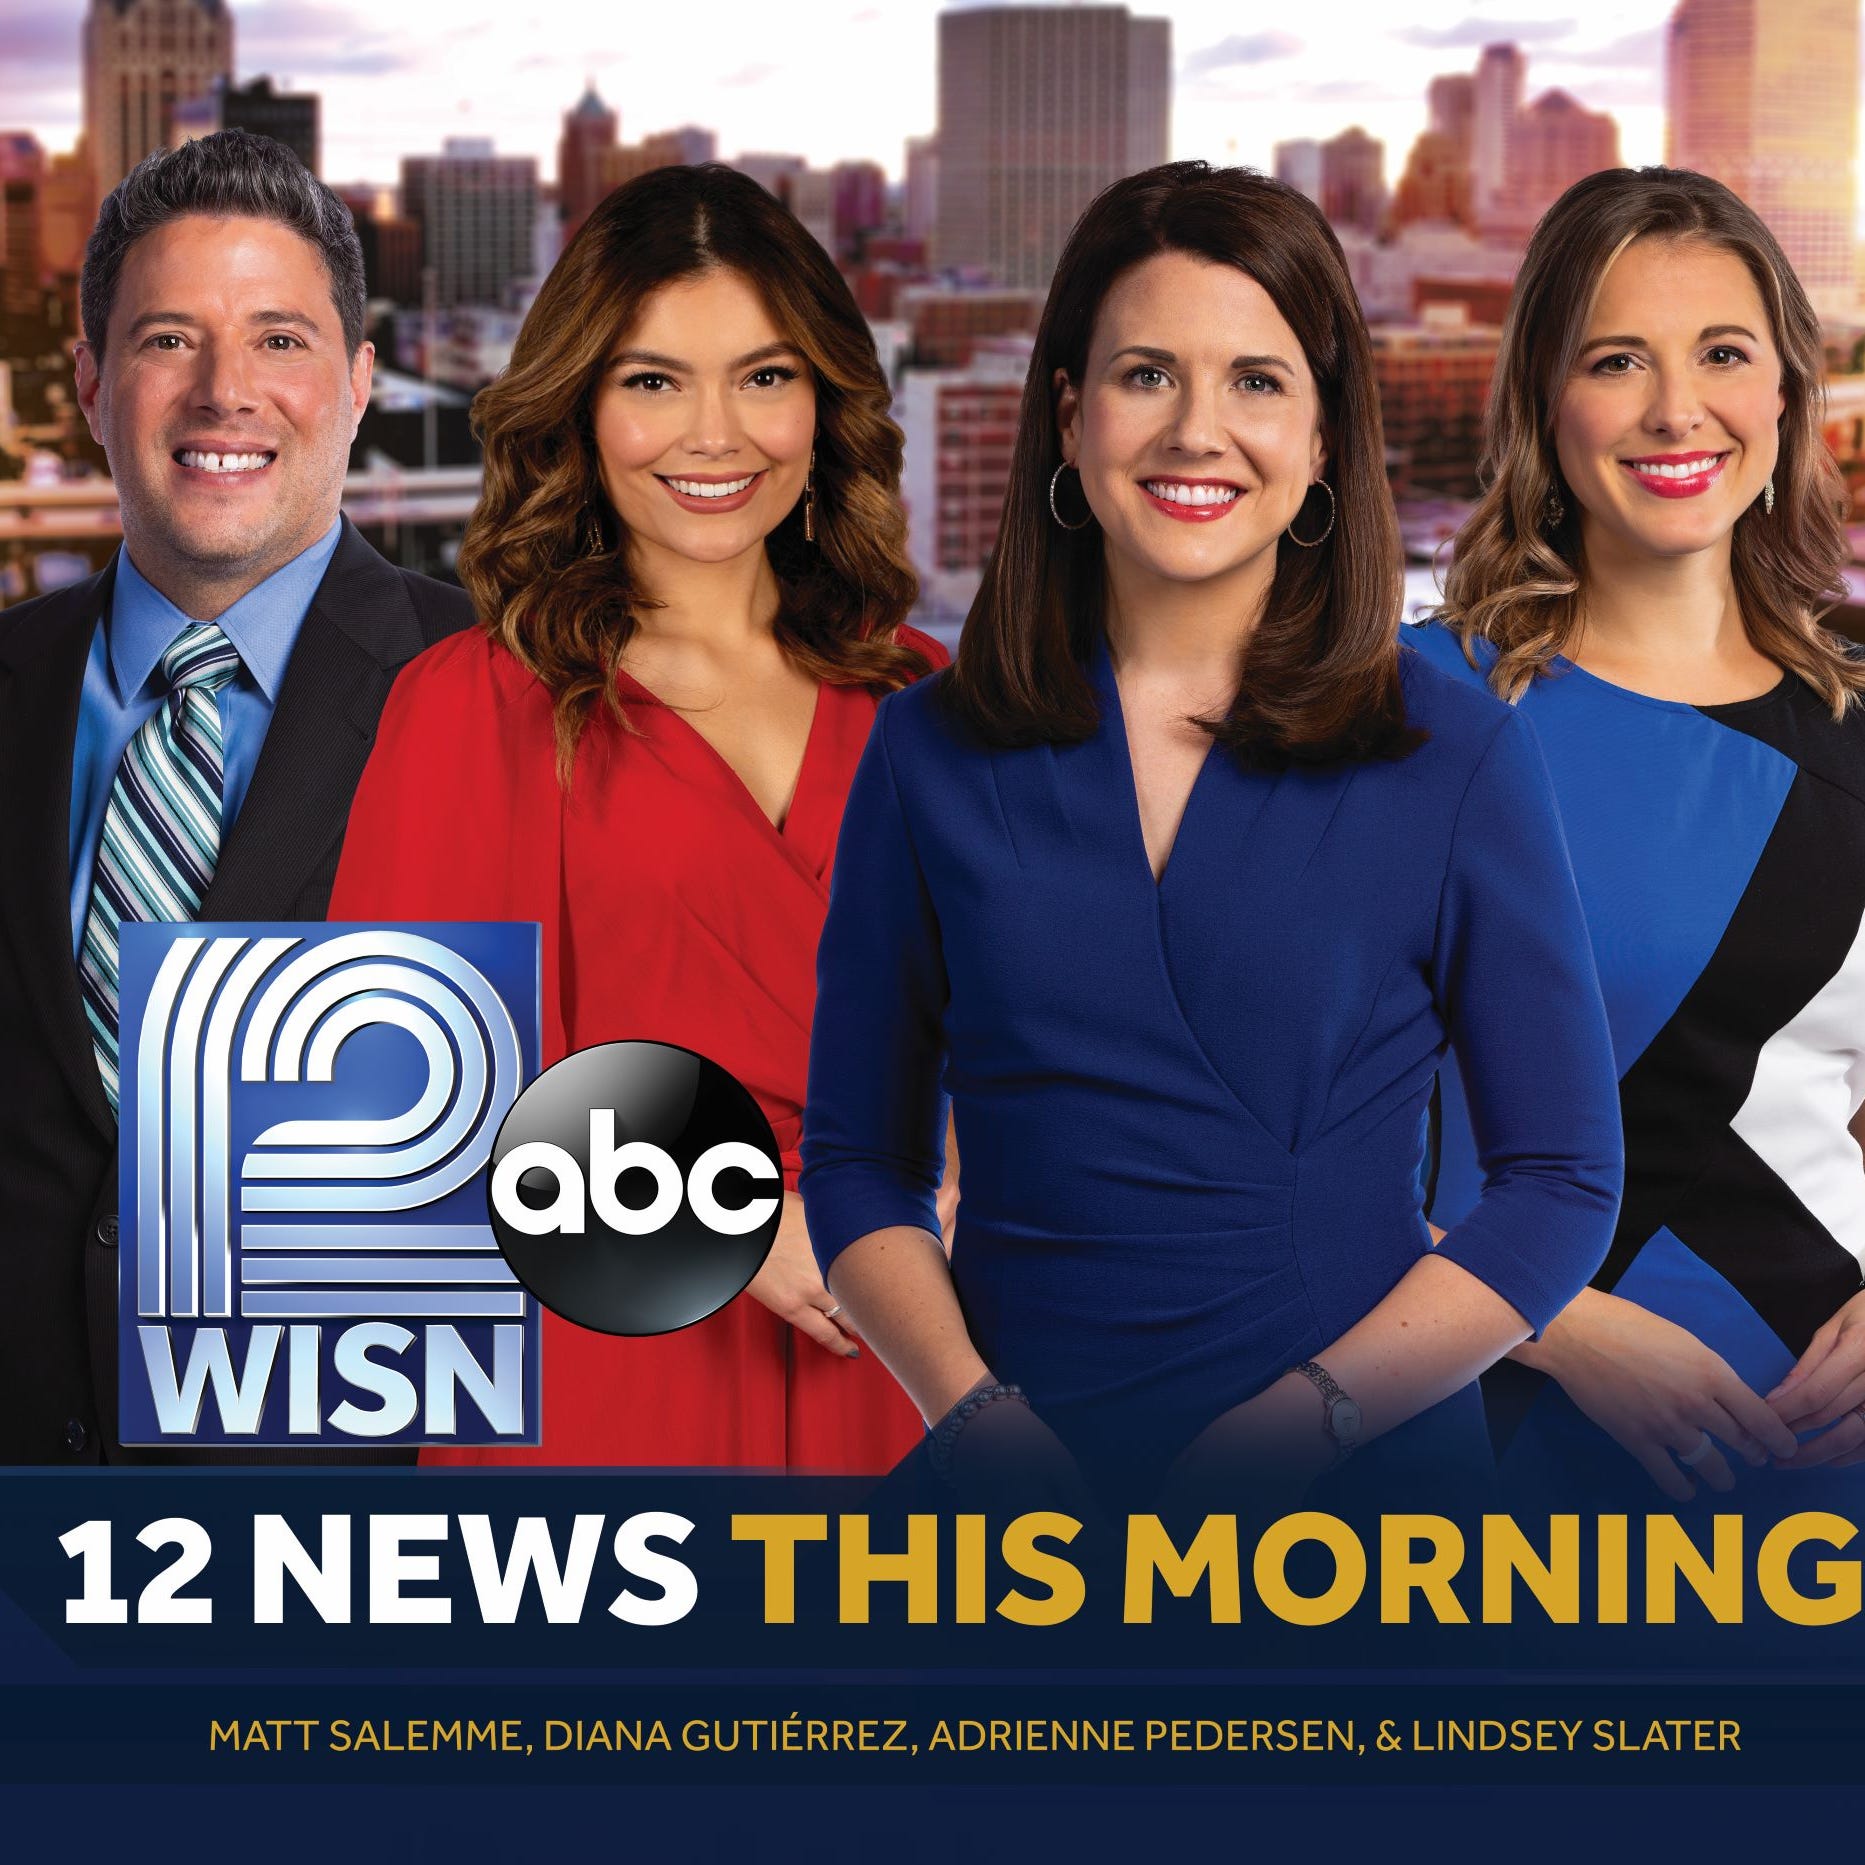 Diana Gutierrez Named Morning News Co Anchor At Milwaukee S Wisn Tv Channel 12 Eden Checkol Going To Miami